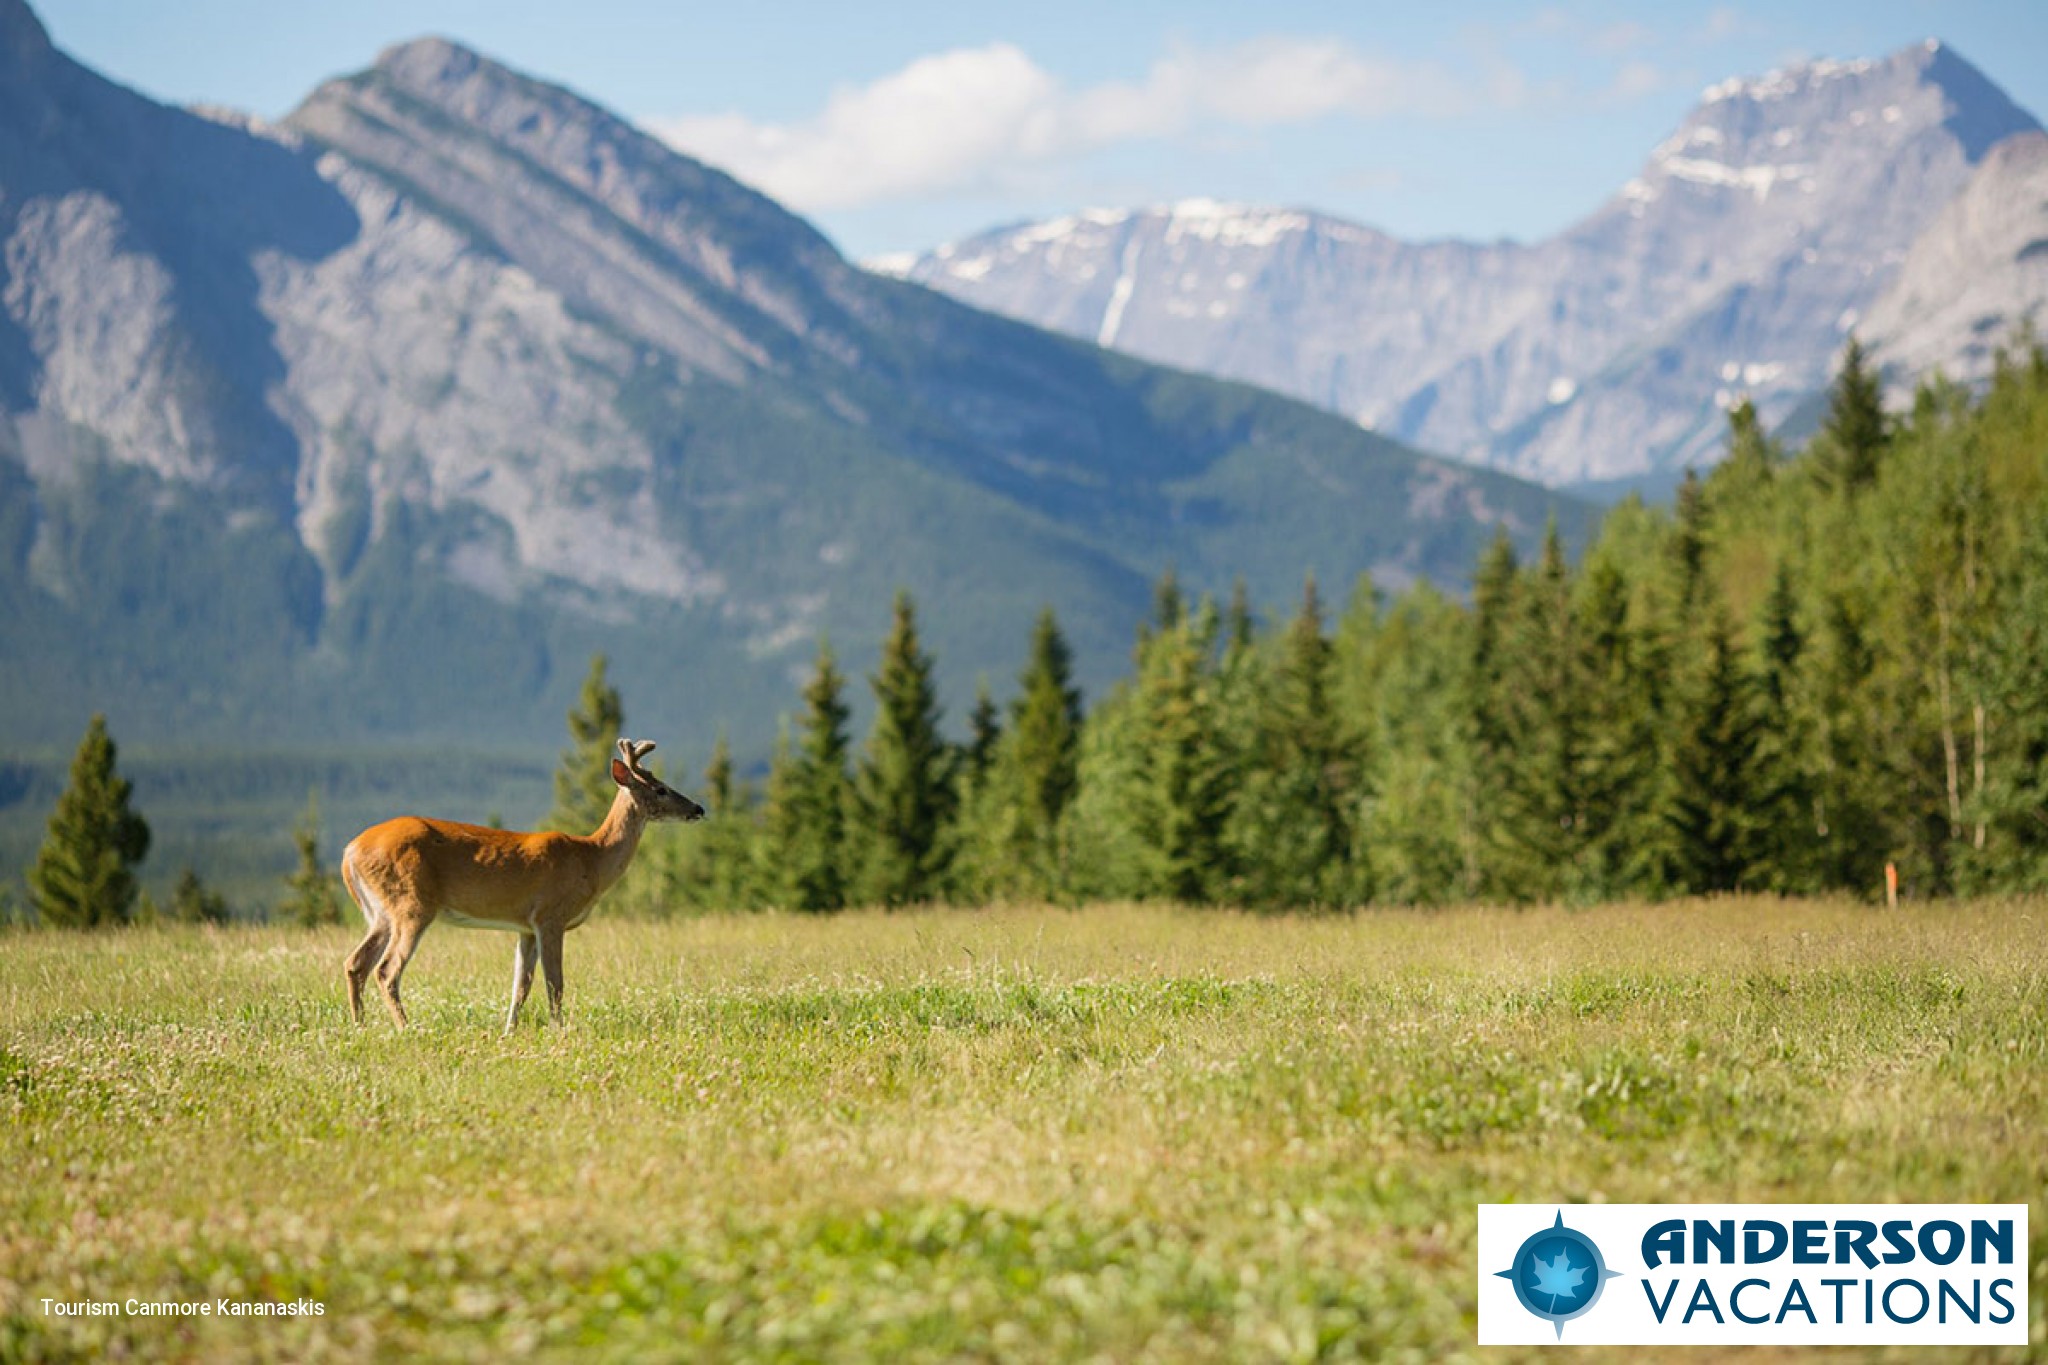 A deer in the Canmore landscape